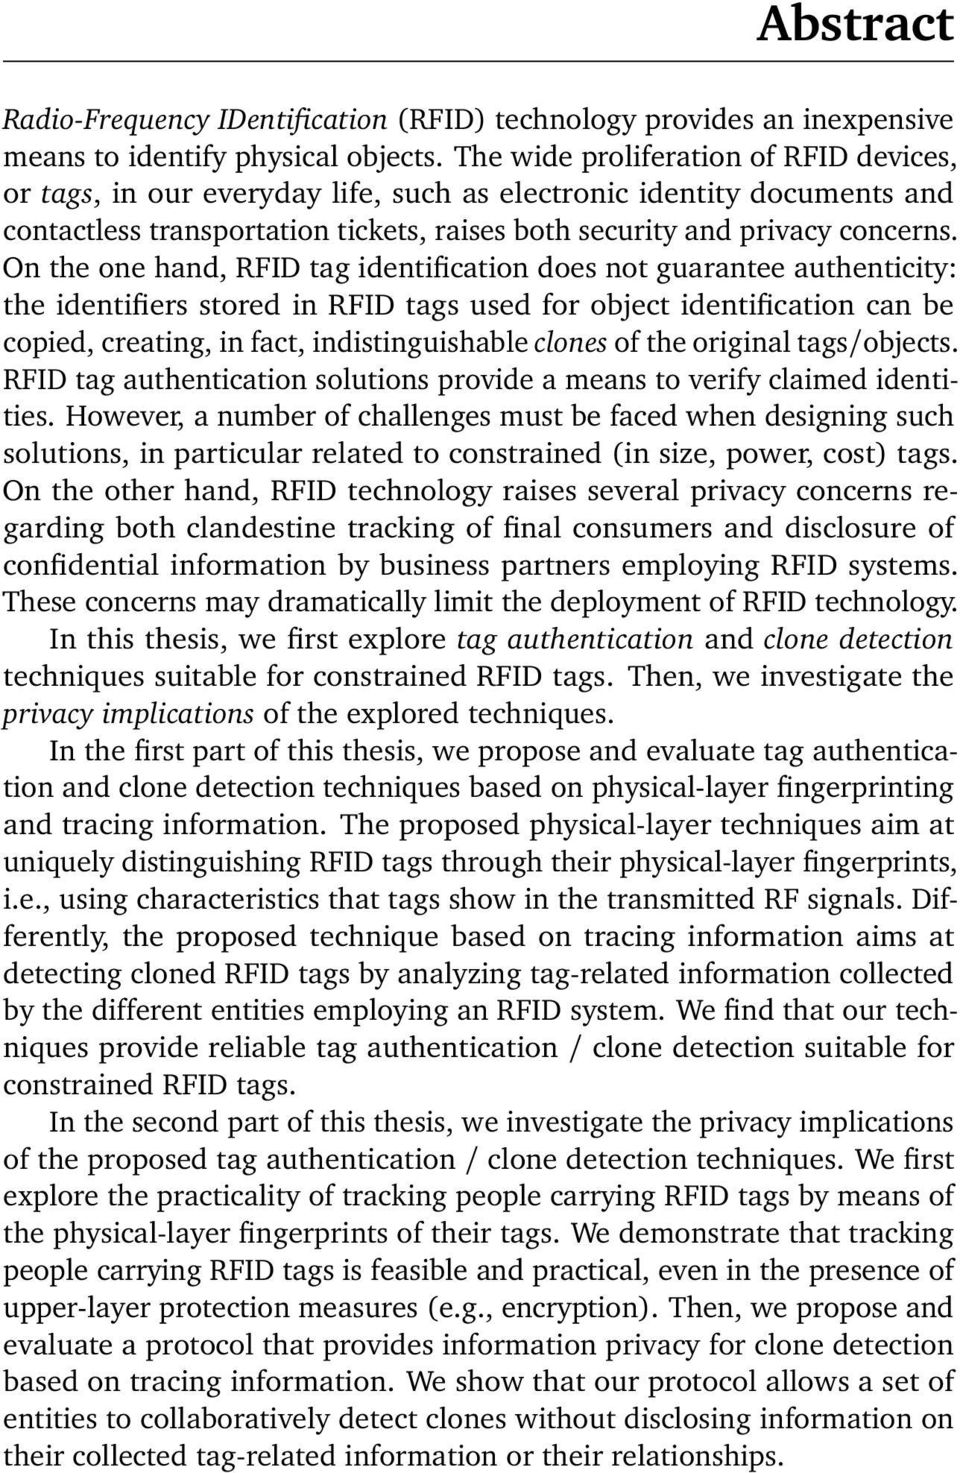 On the one hand, RFID tag identification does not guarantee authenticity: the identifiers stored in RFID tags used for object identification can be copied, creating, in fact, indistinguishable clones